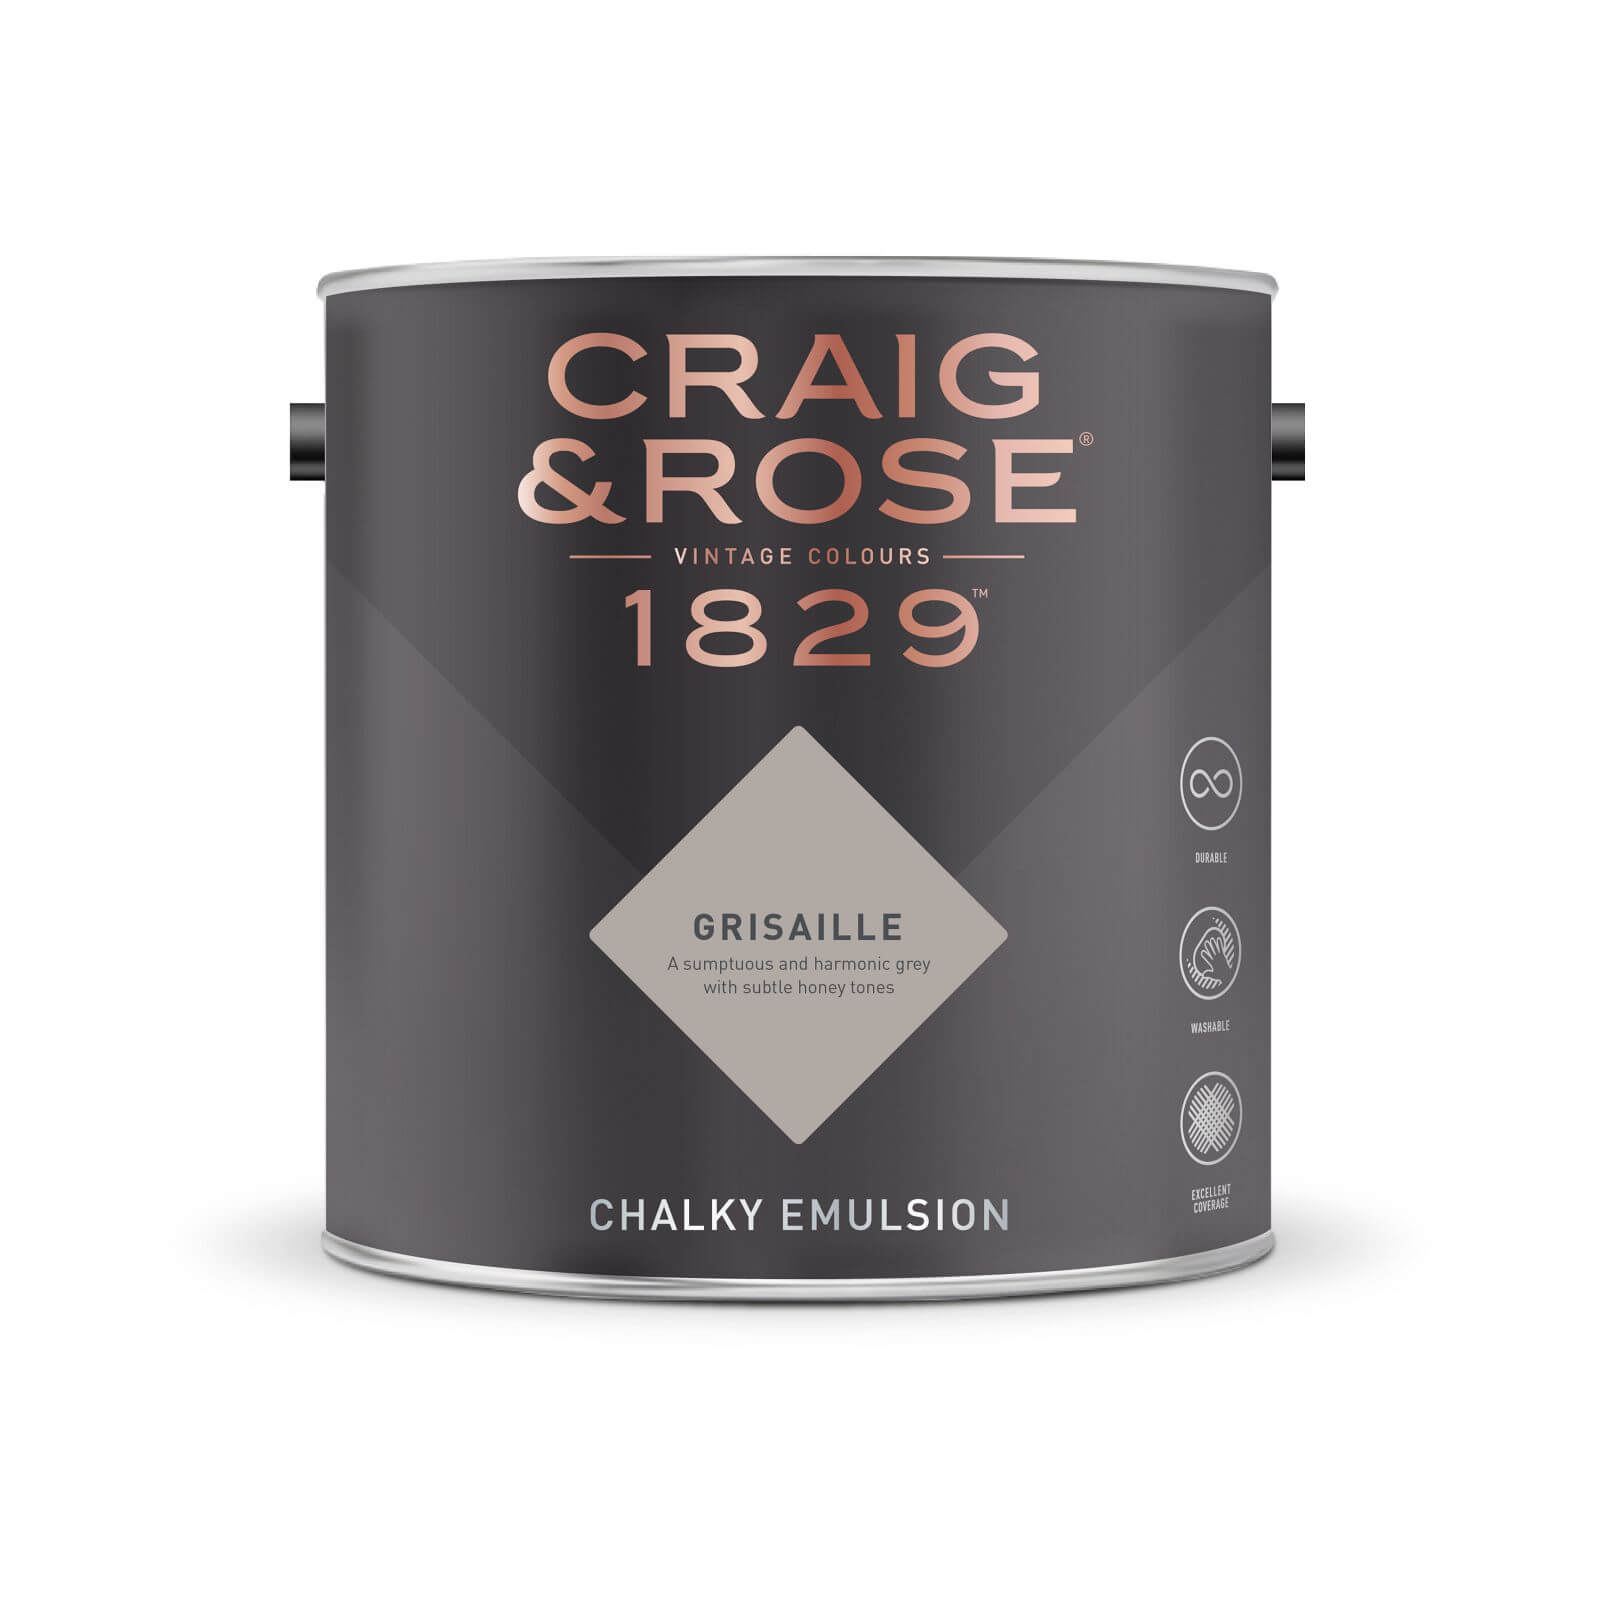 Craig & Rose 1829 Chalky Emulsion Paint Grisaille - Tester 50ml